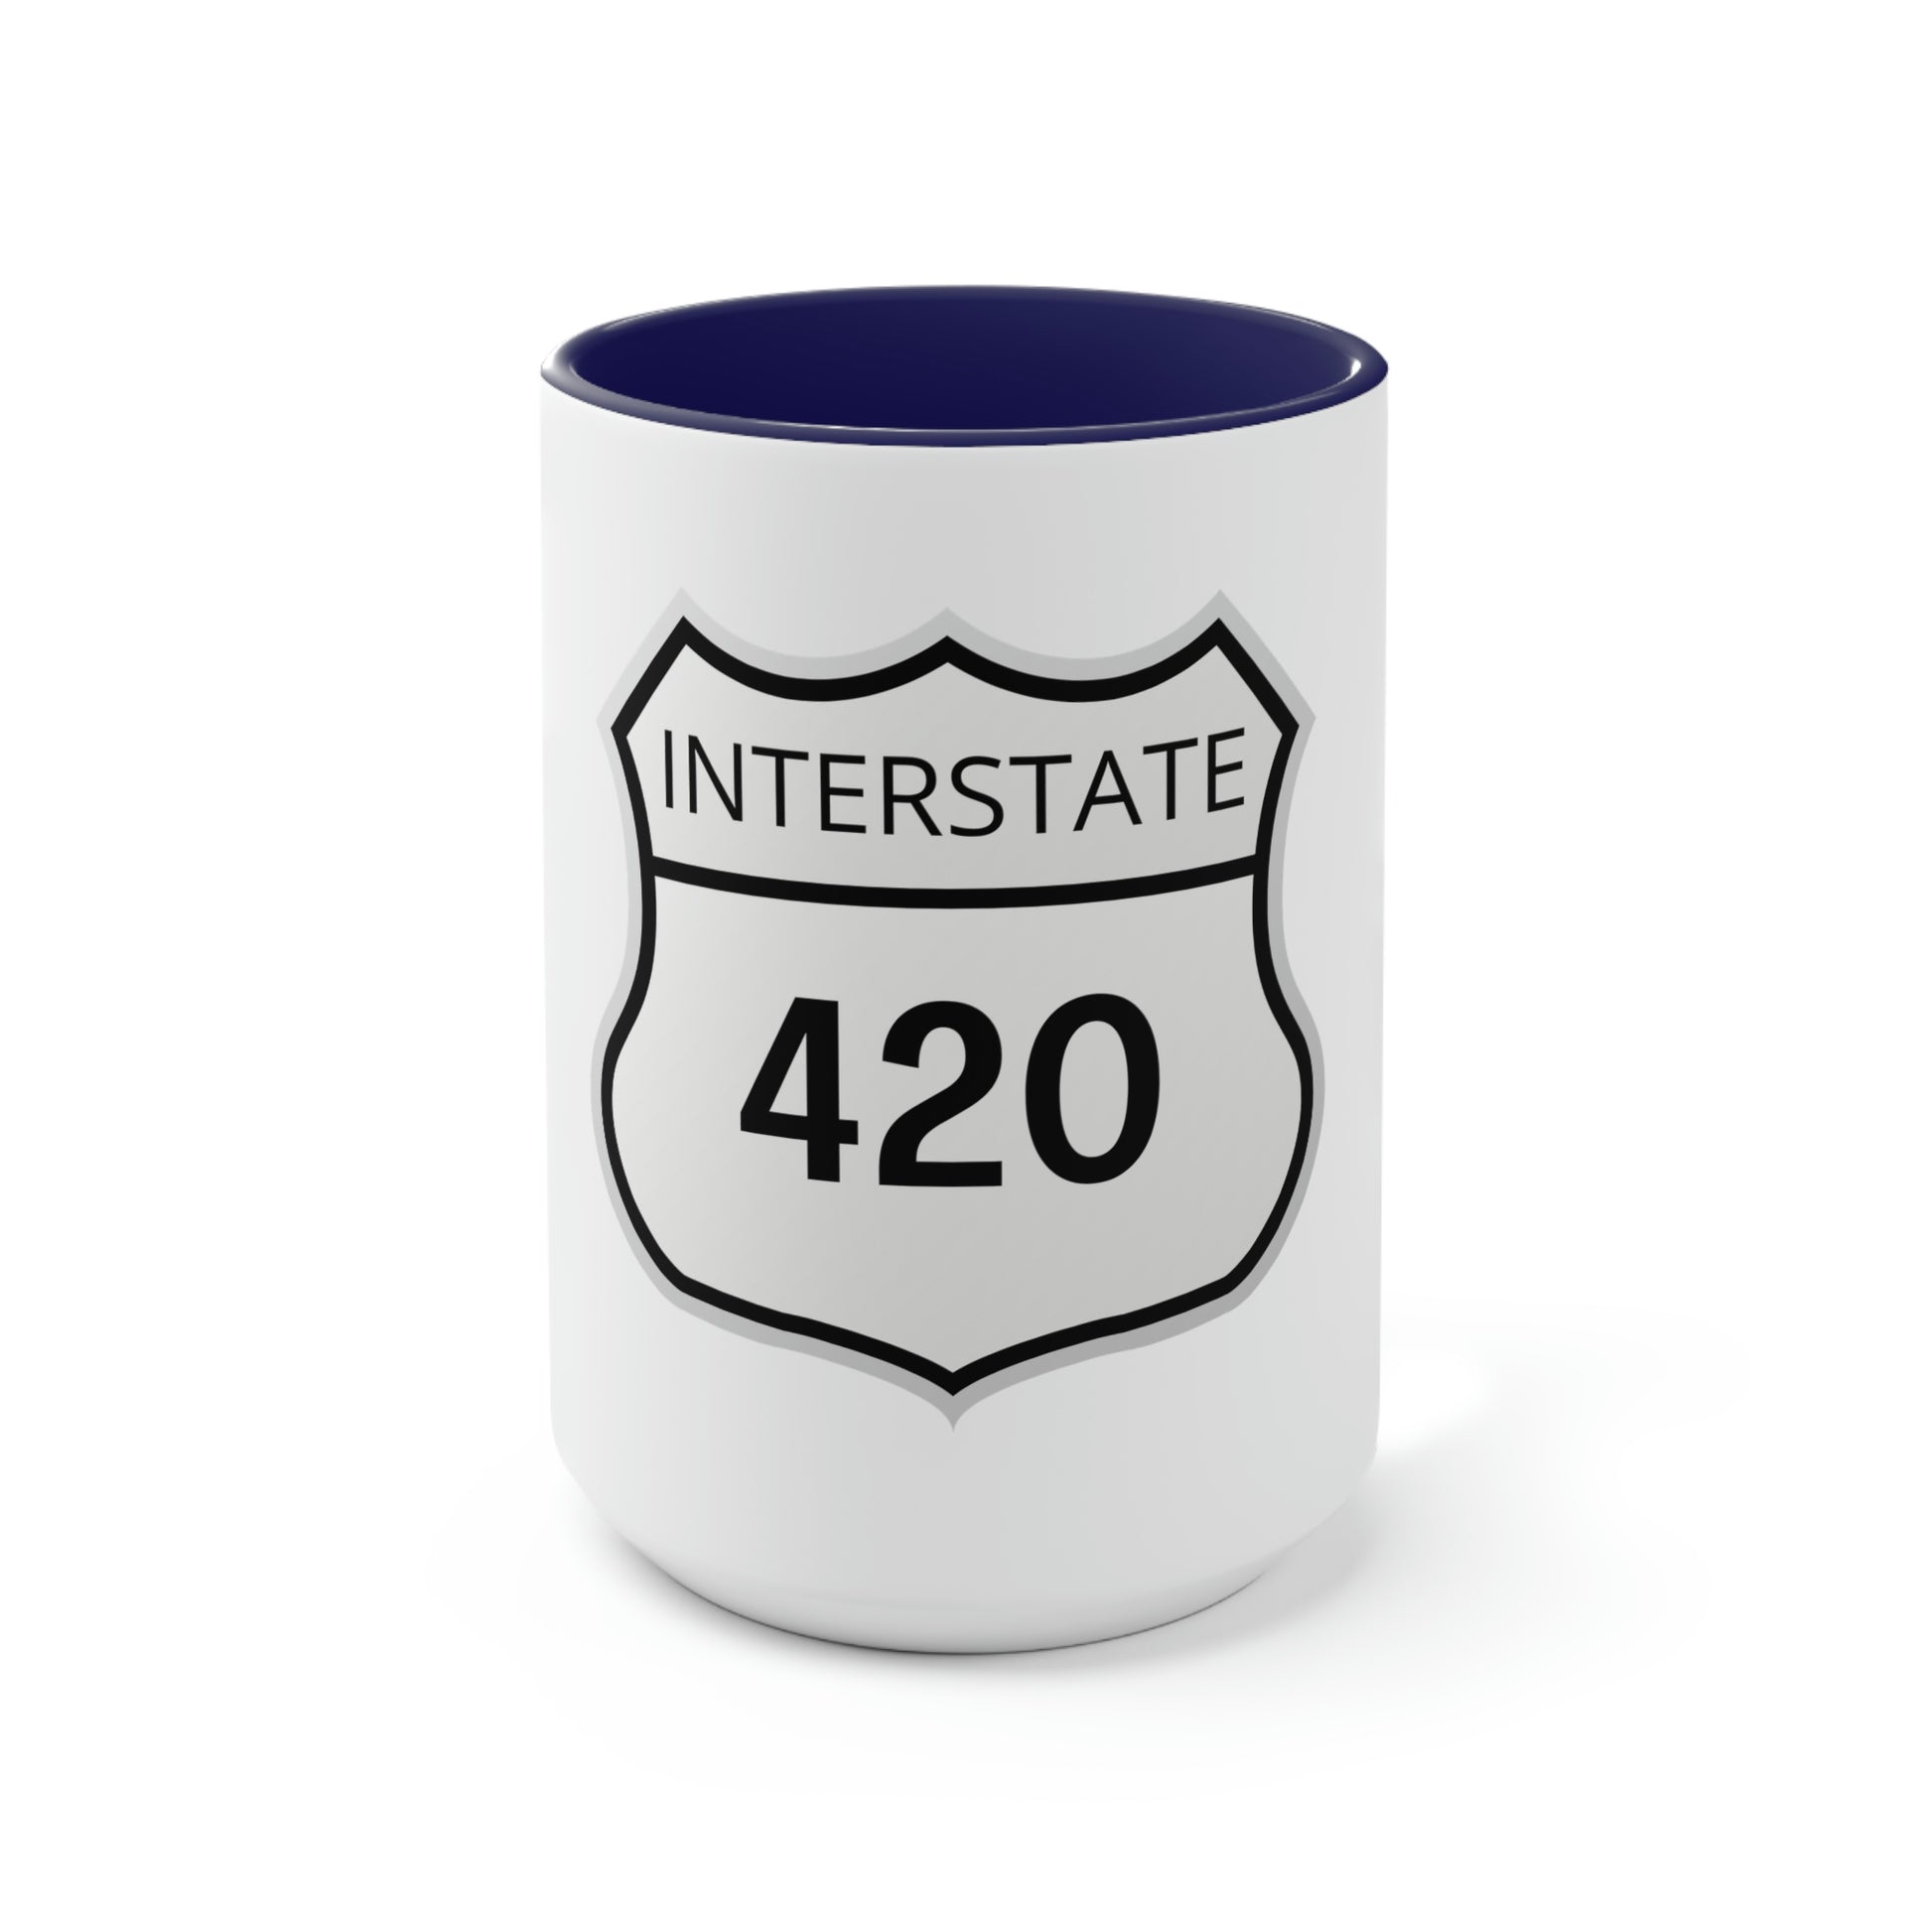 Interstate 420 Two-Tone navy blue and white Coffee Mug with a 420 Highway sign-inspired design.